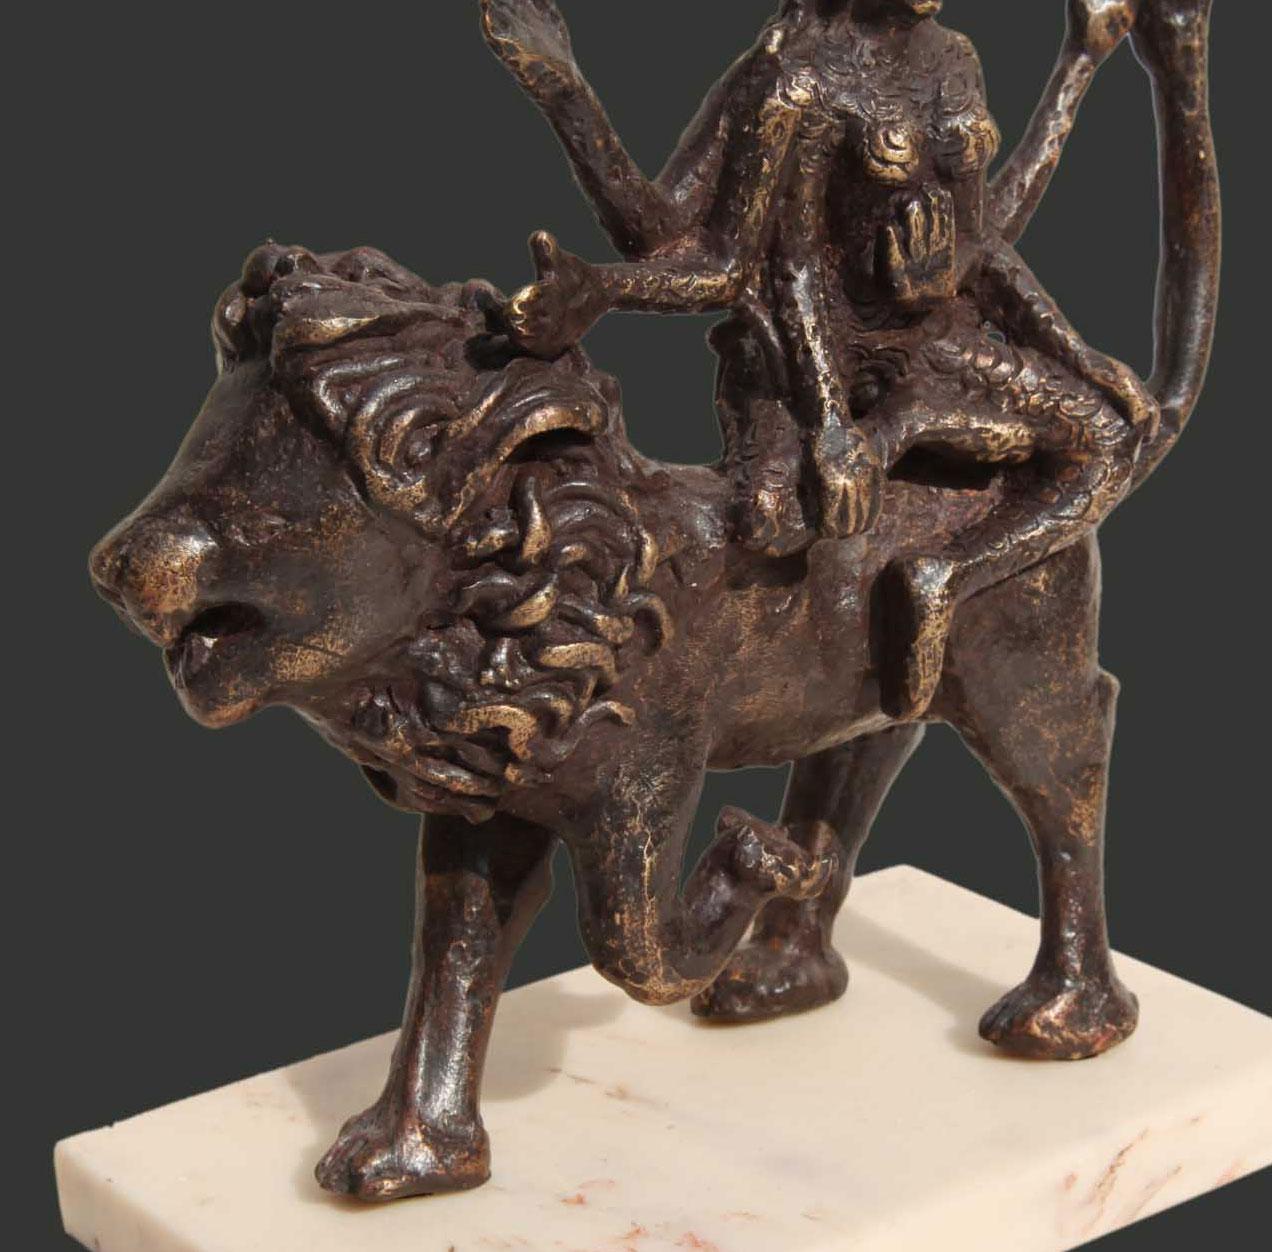 Seema Kohli - Shakti II  - H 7 X L 7.5 X W 3.5 inches
Bronze sculpture.

Seema draws her works from the rich Indian Tradition, myths and mythology and folklore. 
Here her mythological Goddess is perched on her carrier, the beautiful king of the